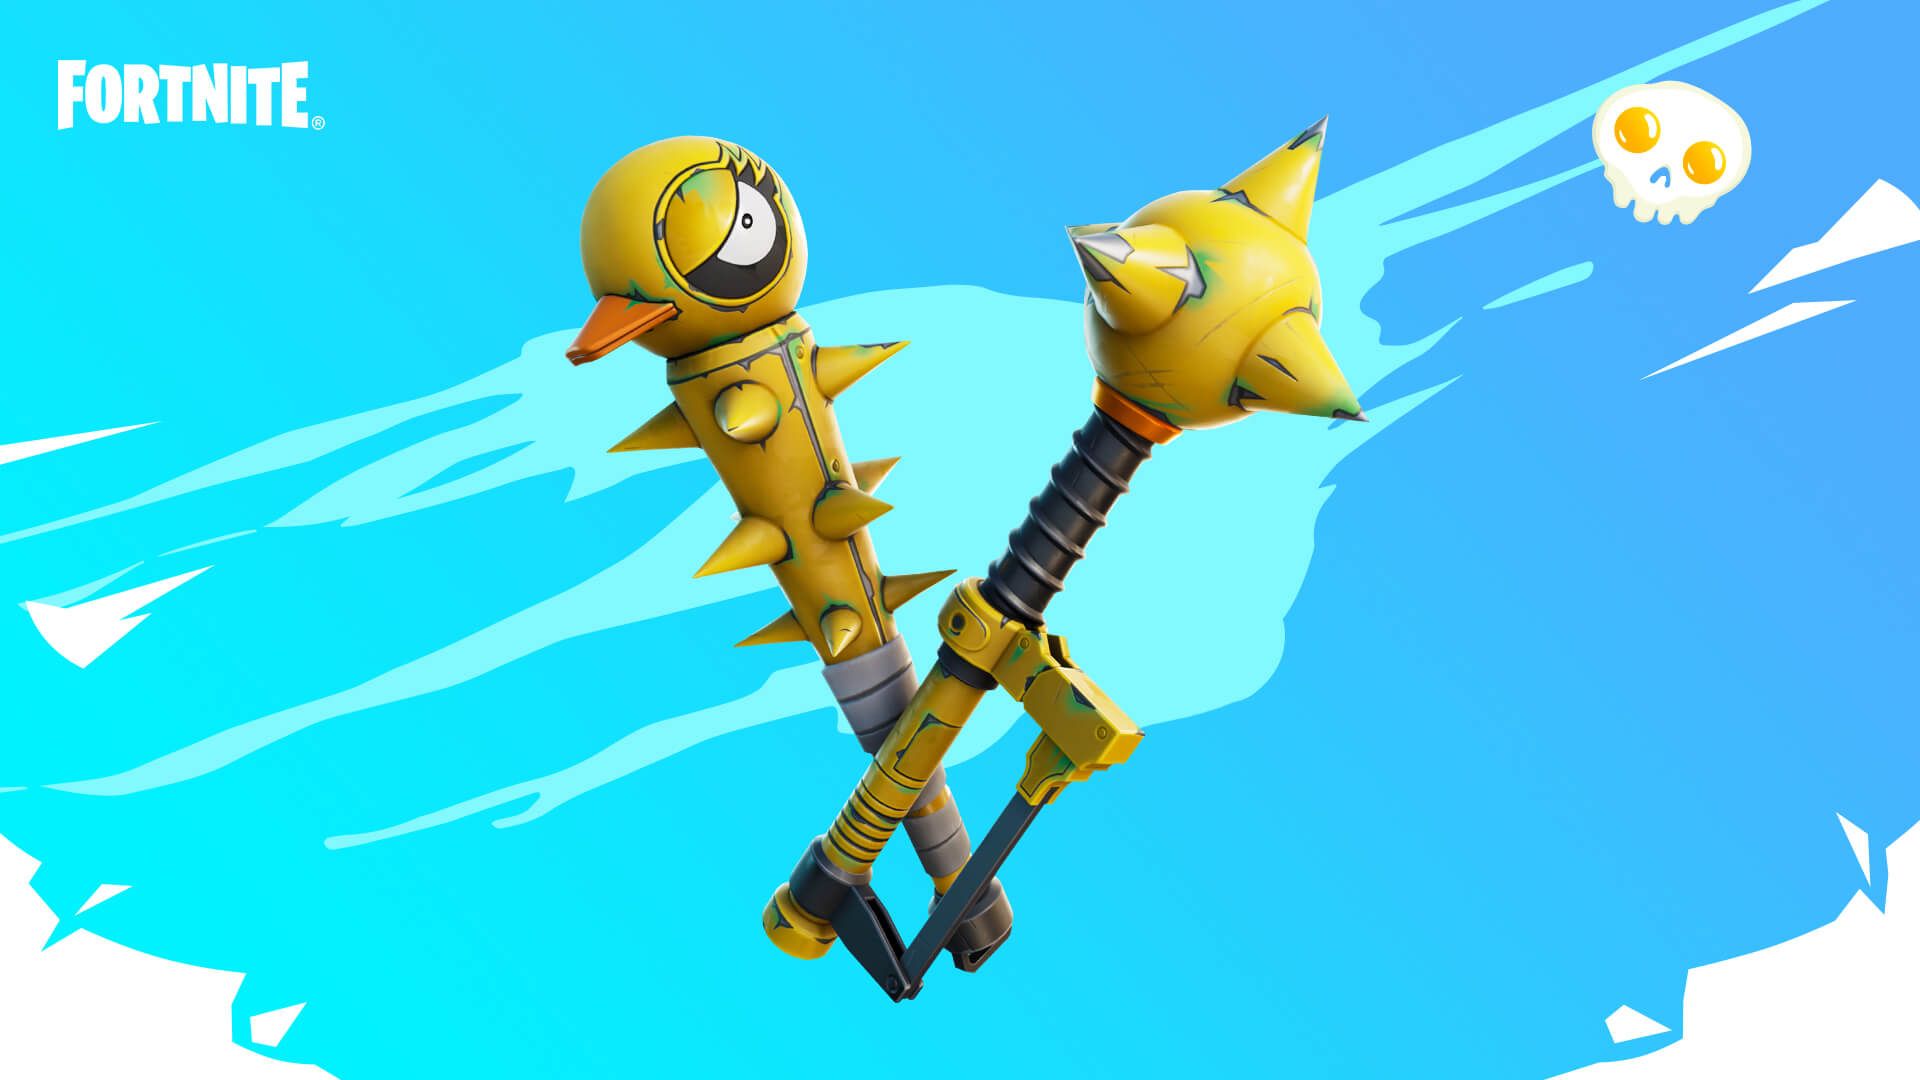 Spring Breakout Fun Arrives in Fortnite on March 30